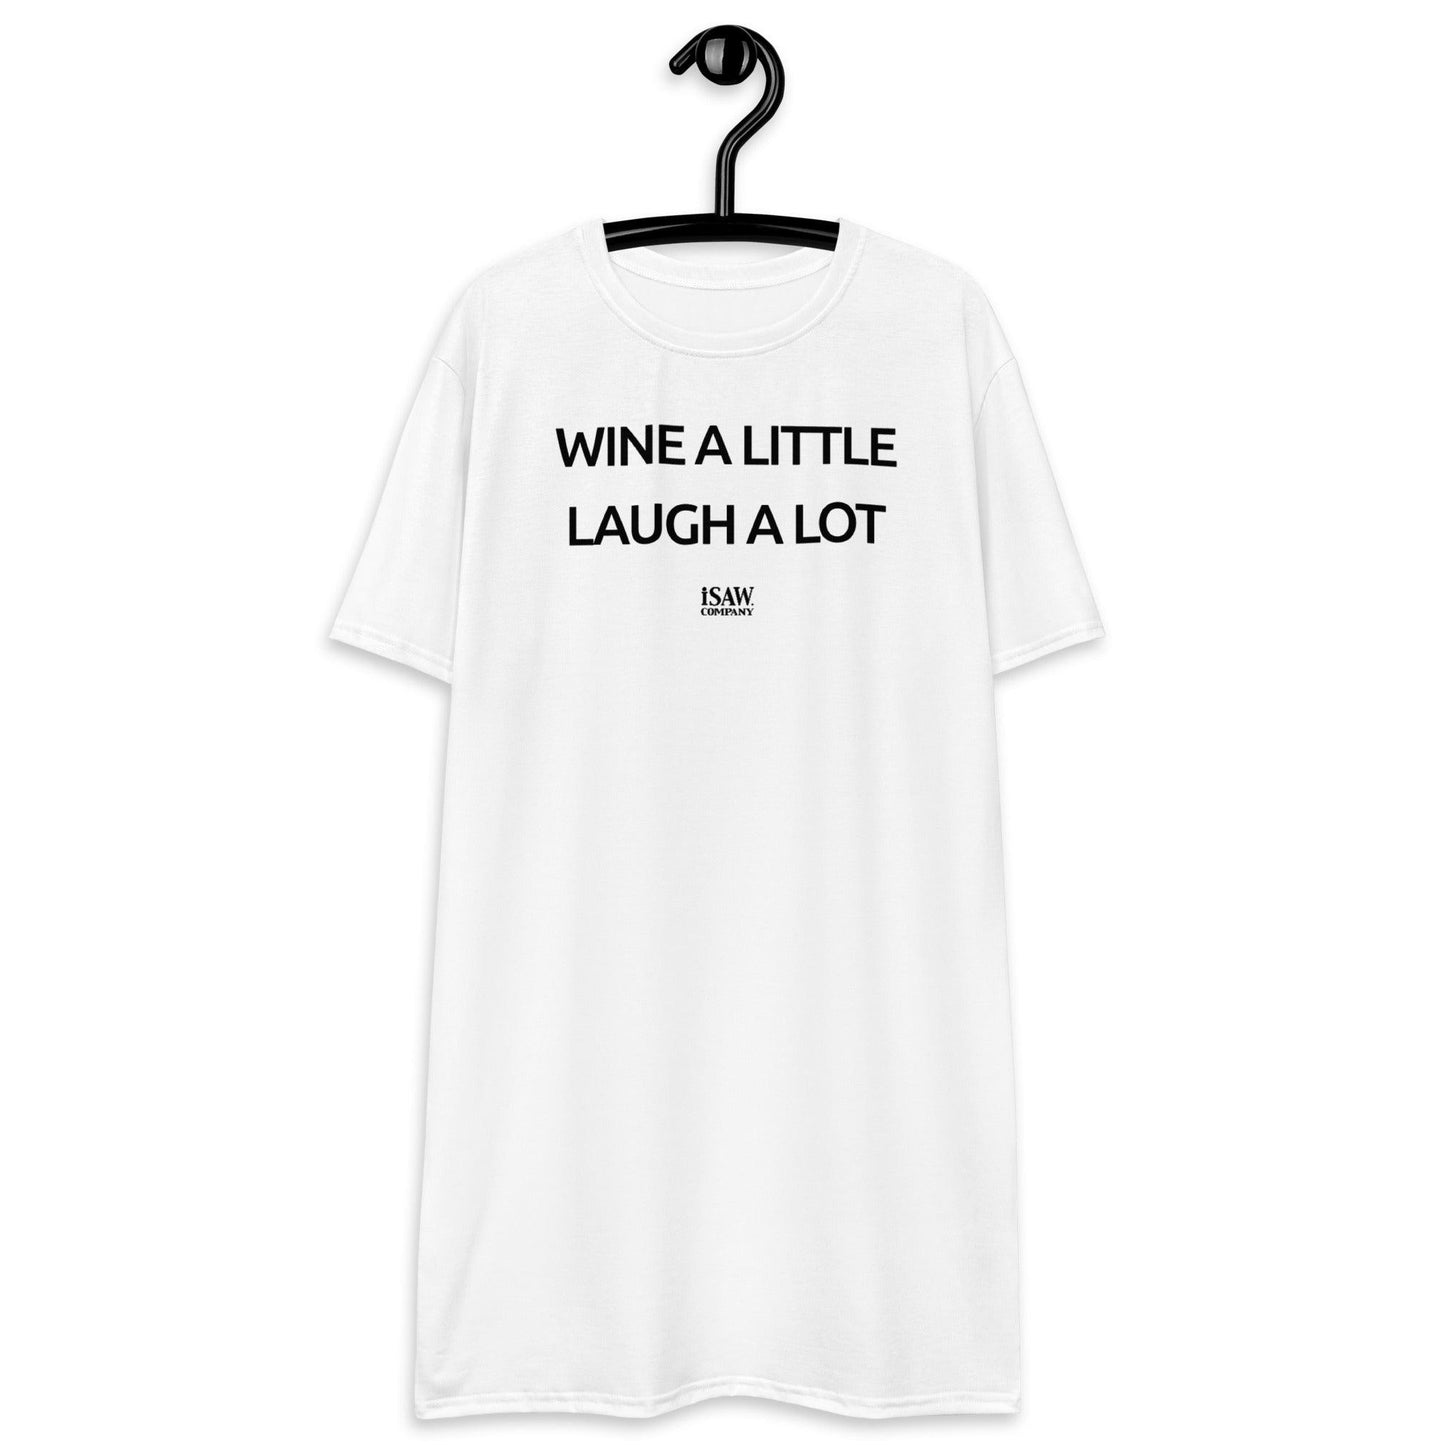 Wine A Little Laugh A Lot - Womens White T-Shirt Dress - iSAW Company